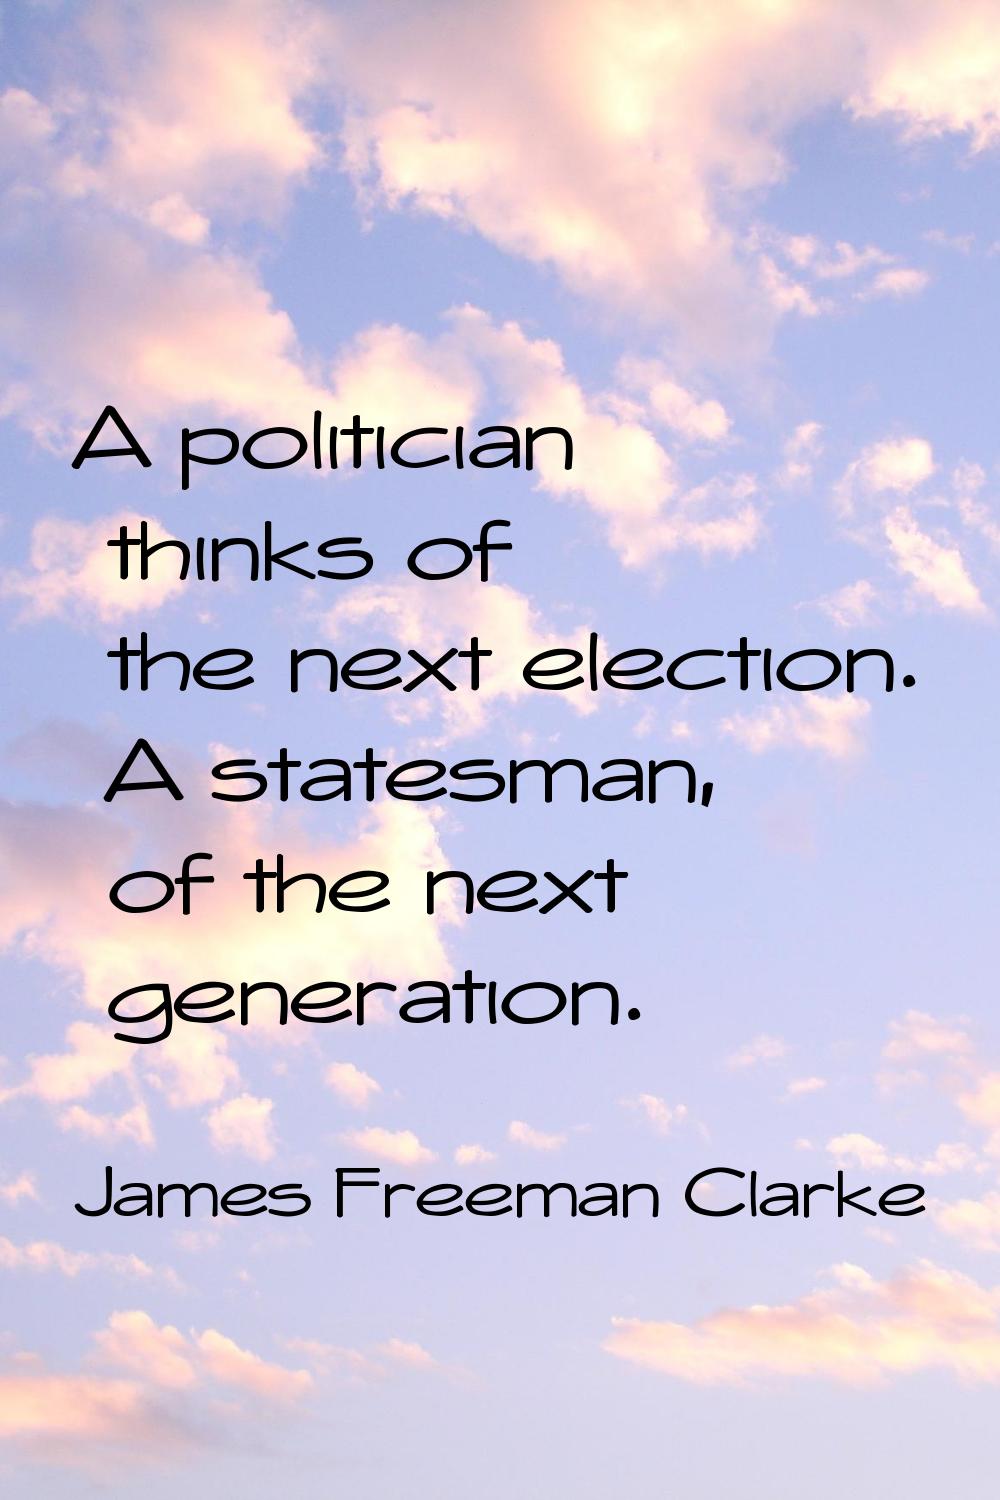 A politician thinks of the next election. A statesman, of the next generation.